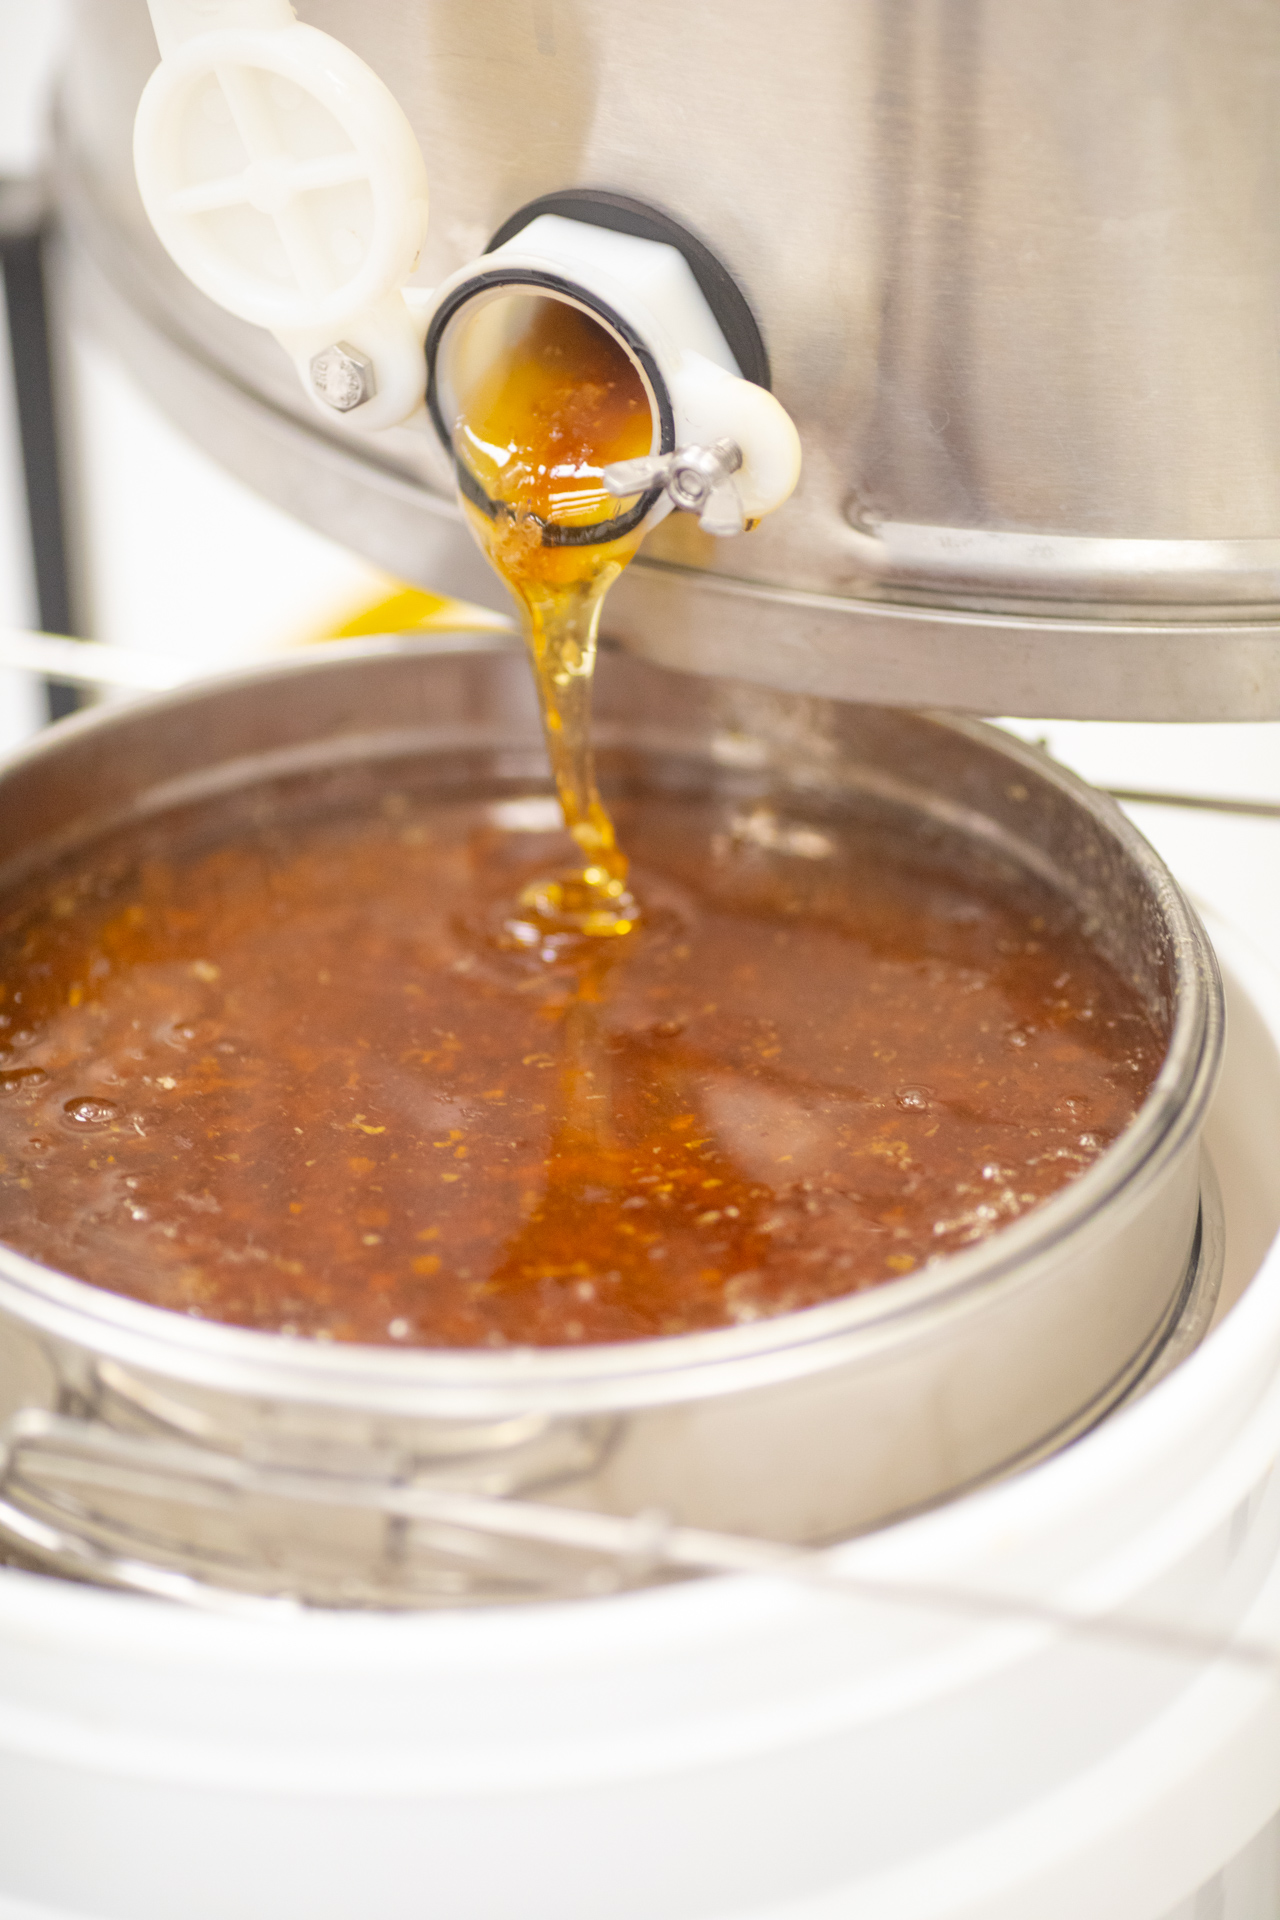 Honey flowing from a large metal vat into a pan.